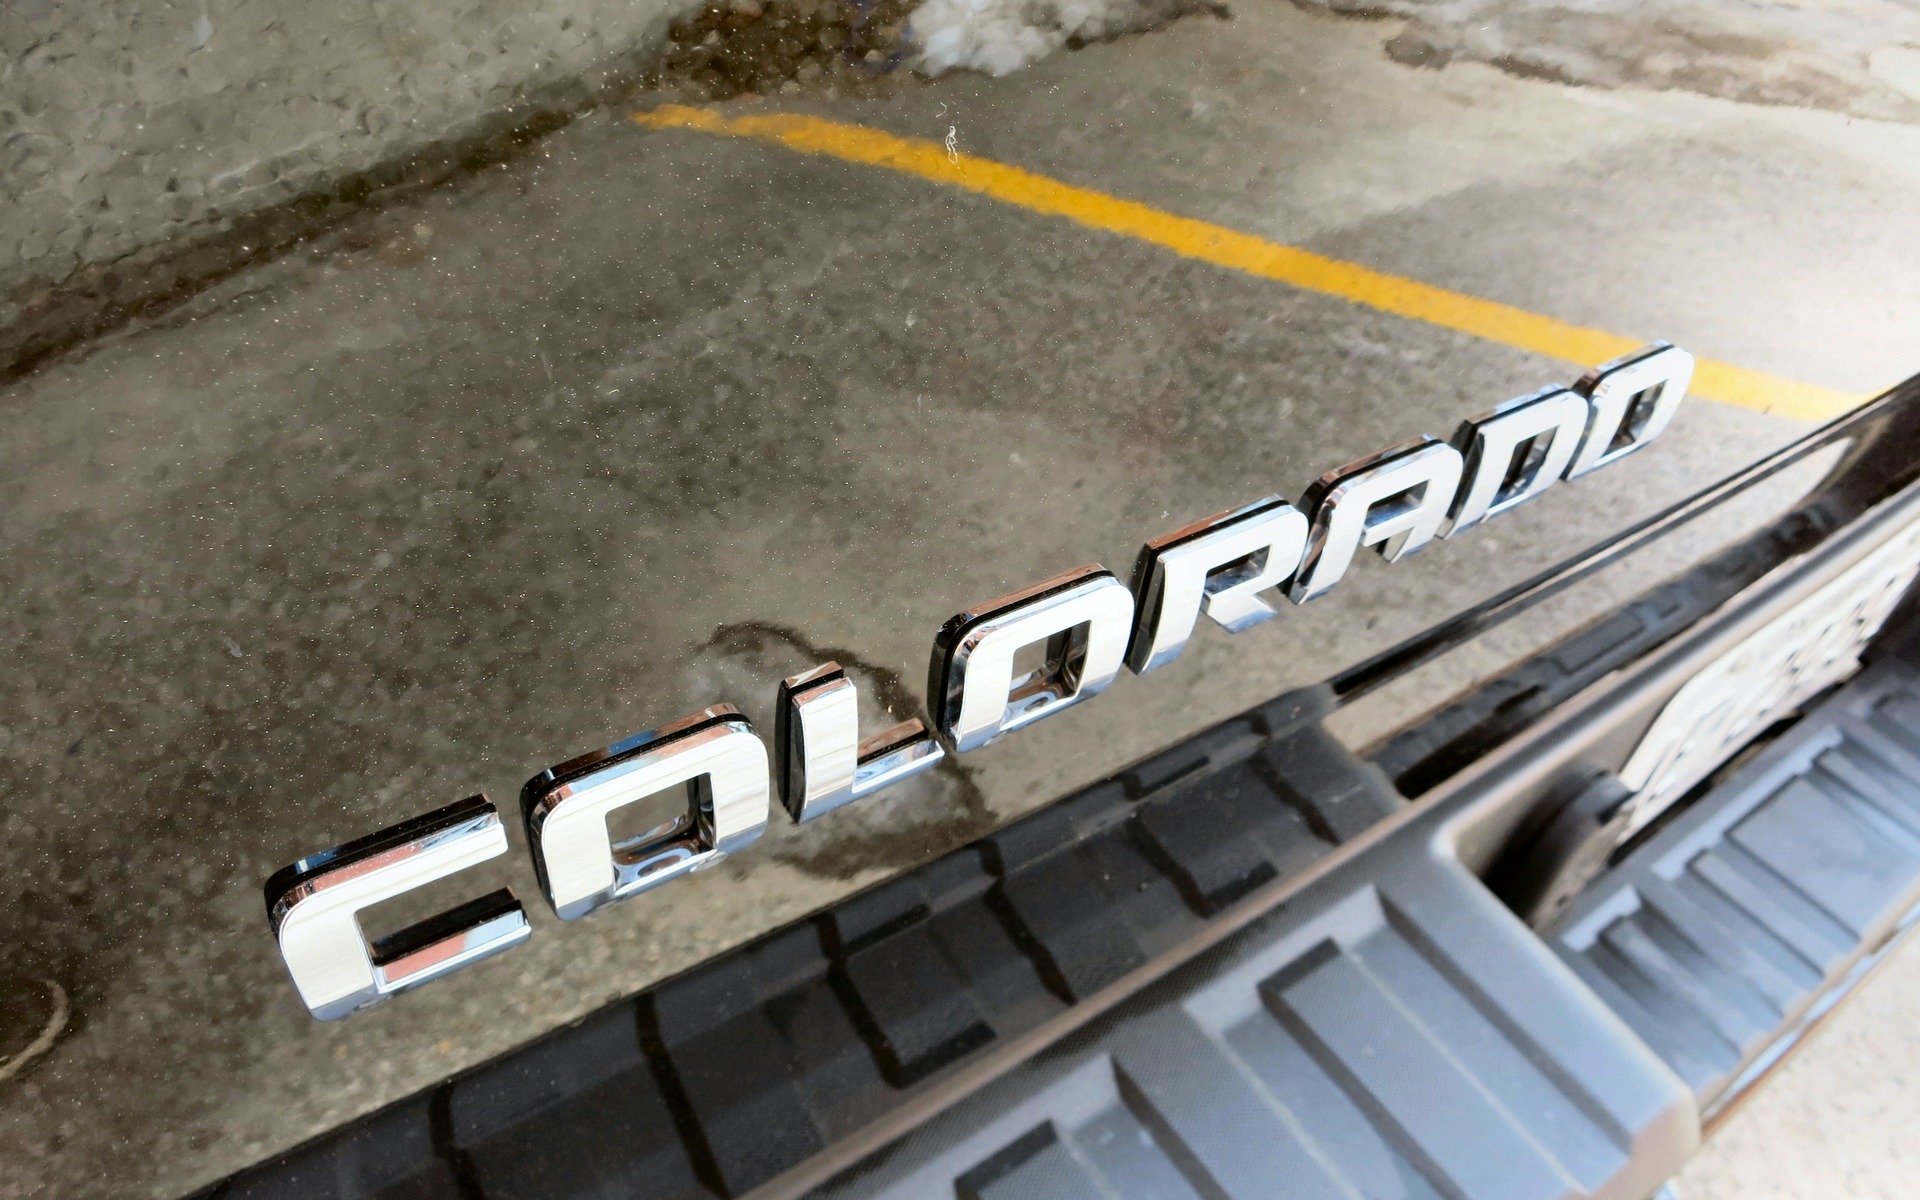 The Colorado is larger than its predecessor, but not cripplingly so.